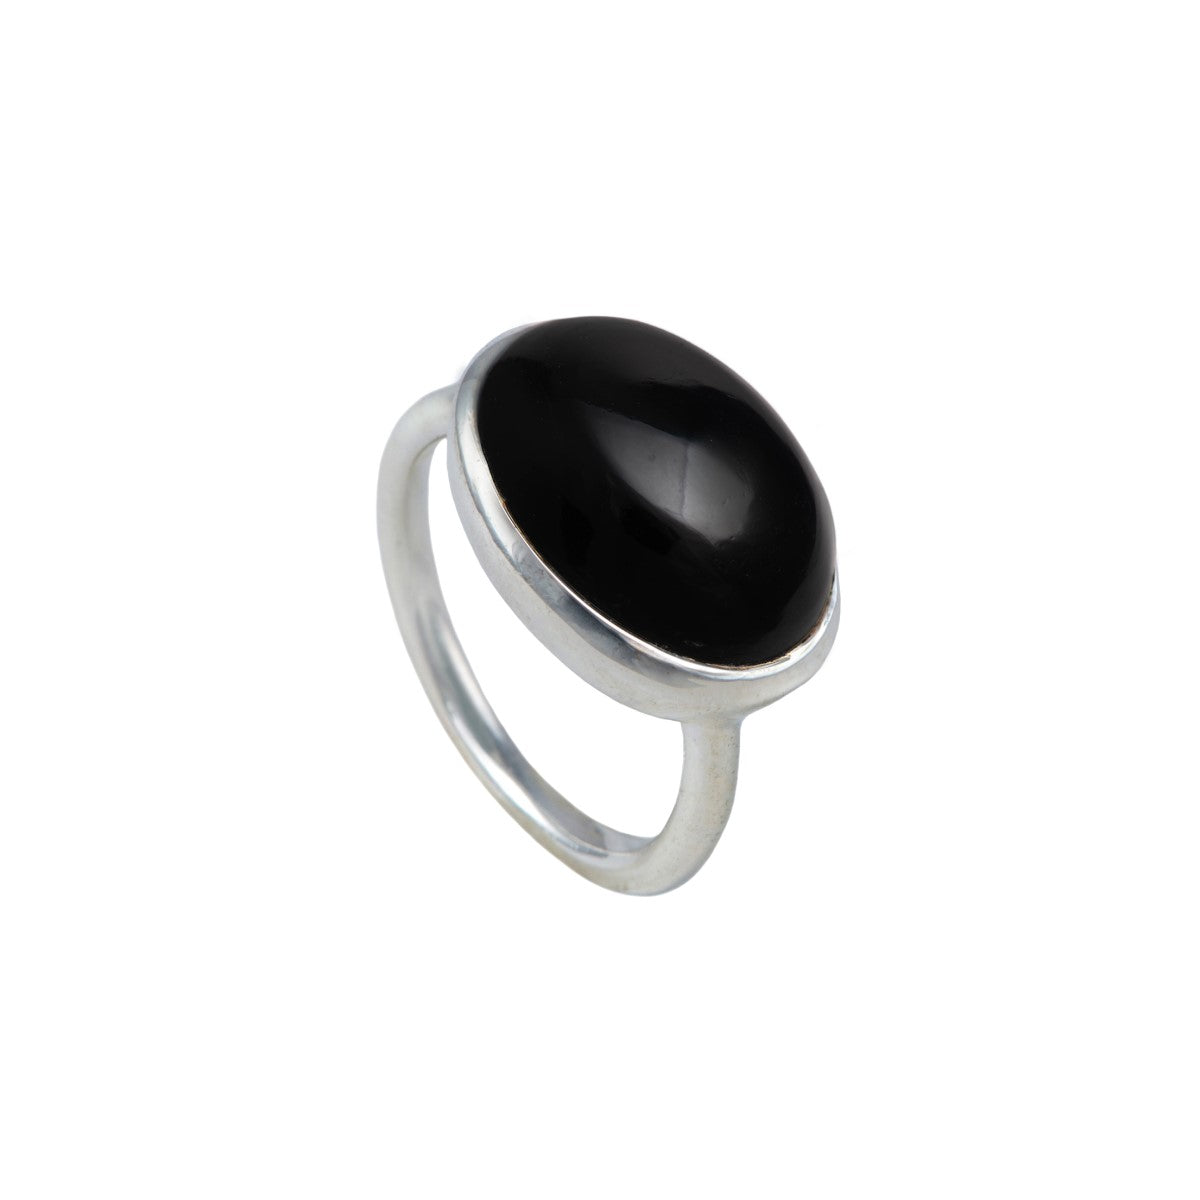 Cabochon Oval Cut Natural Gemstone Sterling Silver Ring - Black Onyx